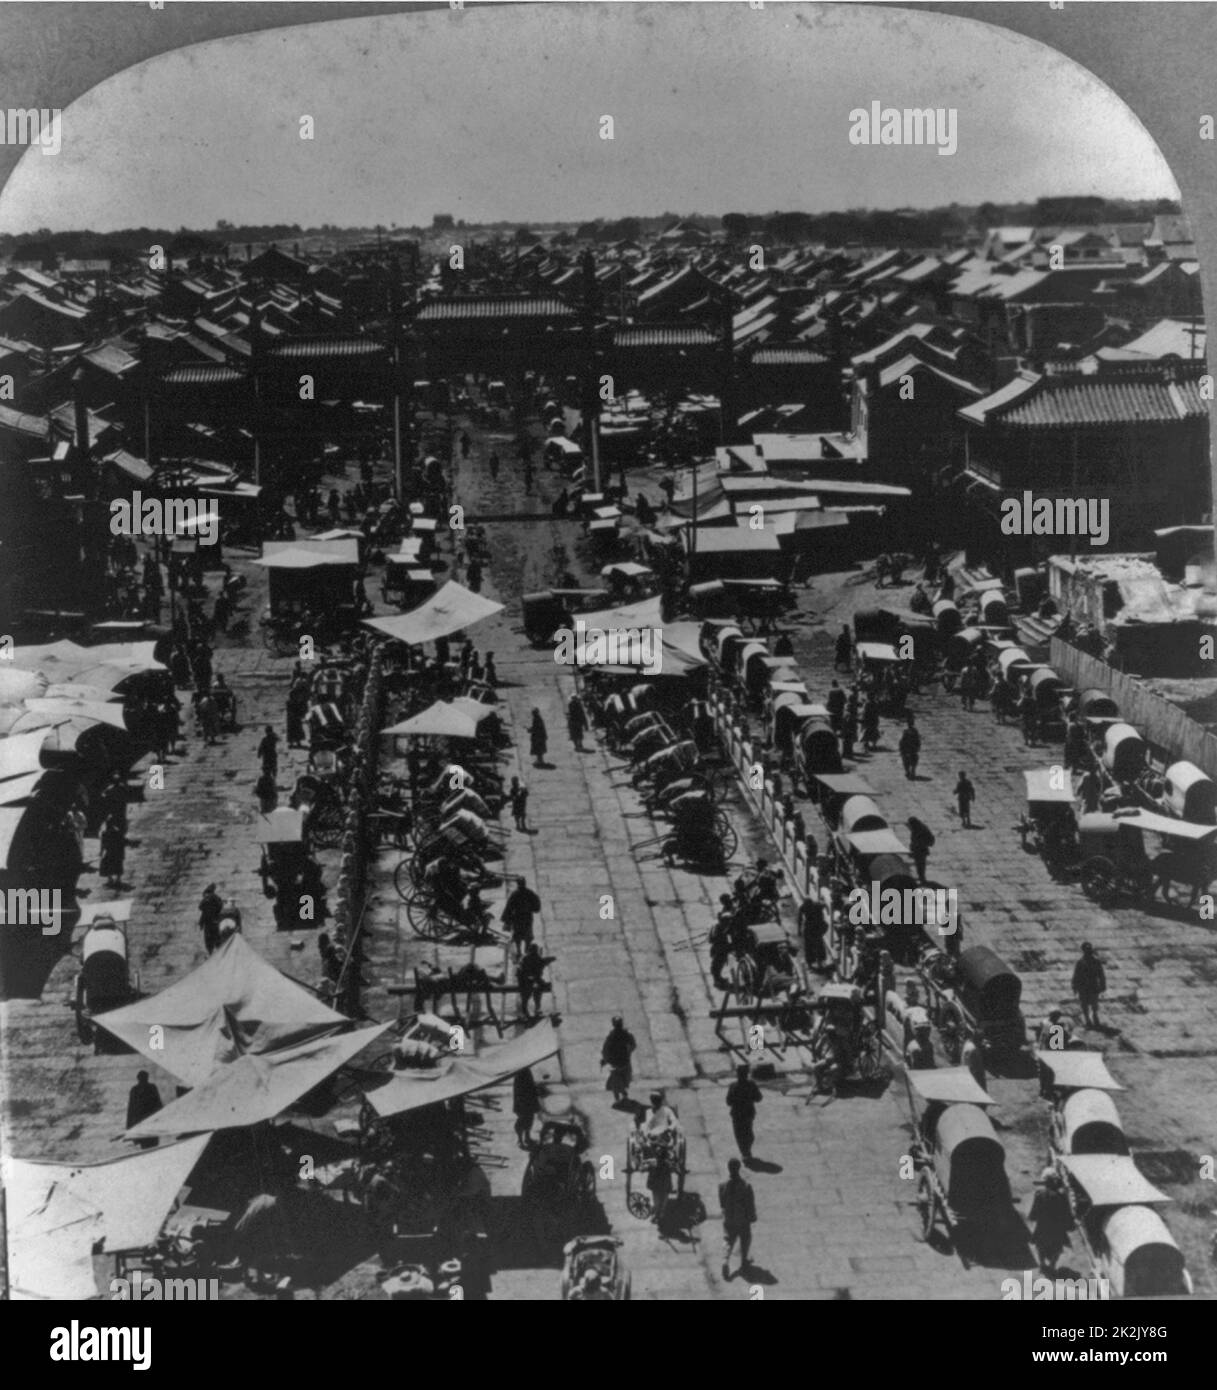 The main street in the Chinese city of Beijing (Peking), China 1902. photographic print on stereo card or stereograph Stock Photo